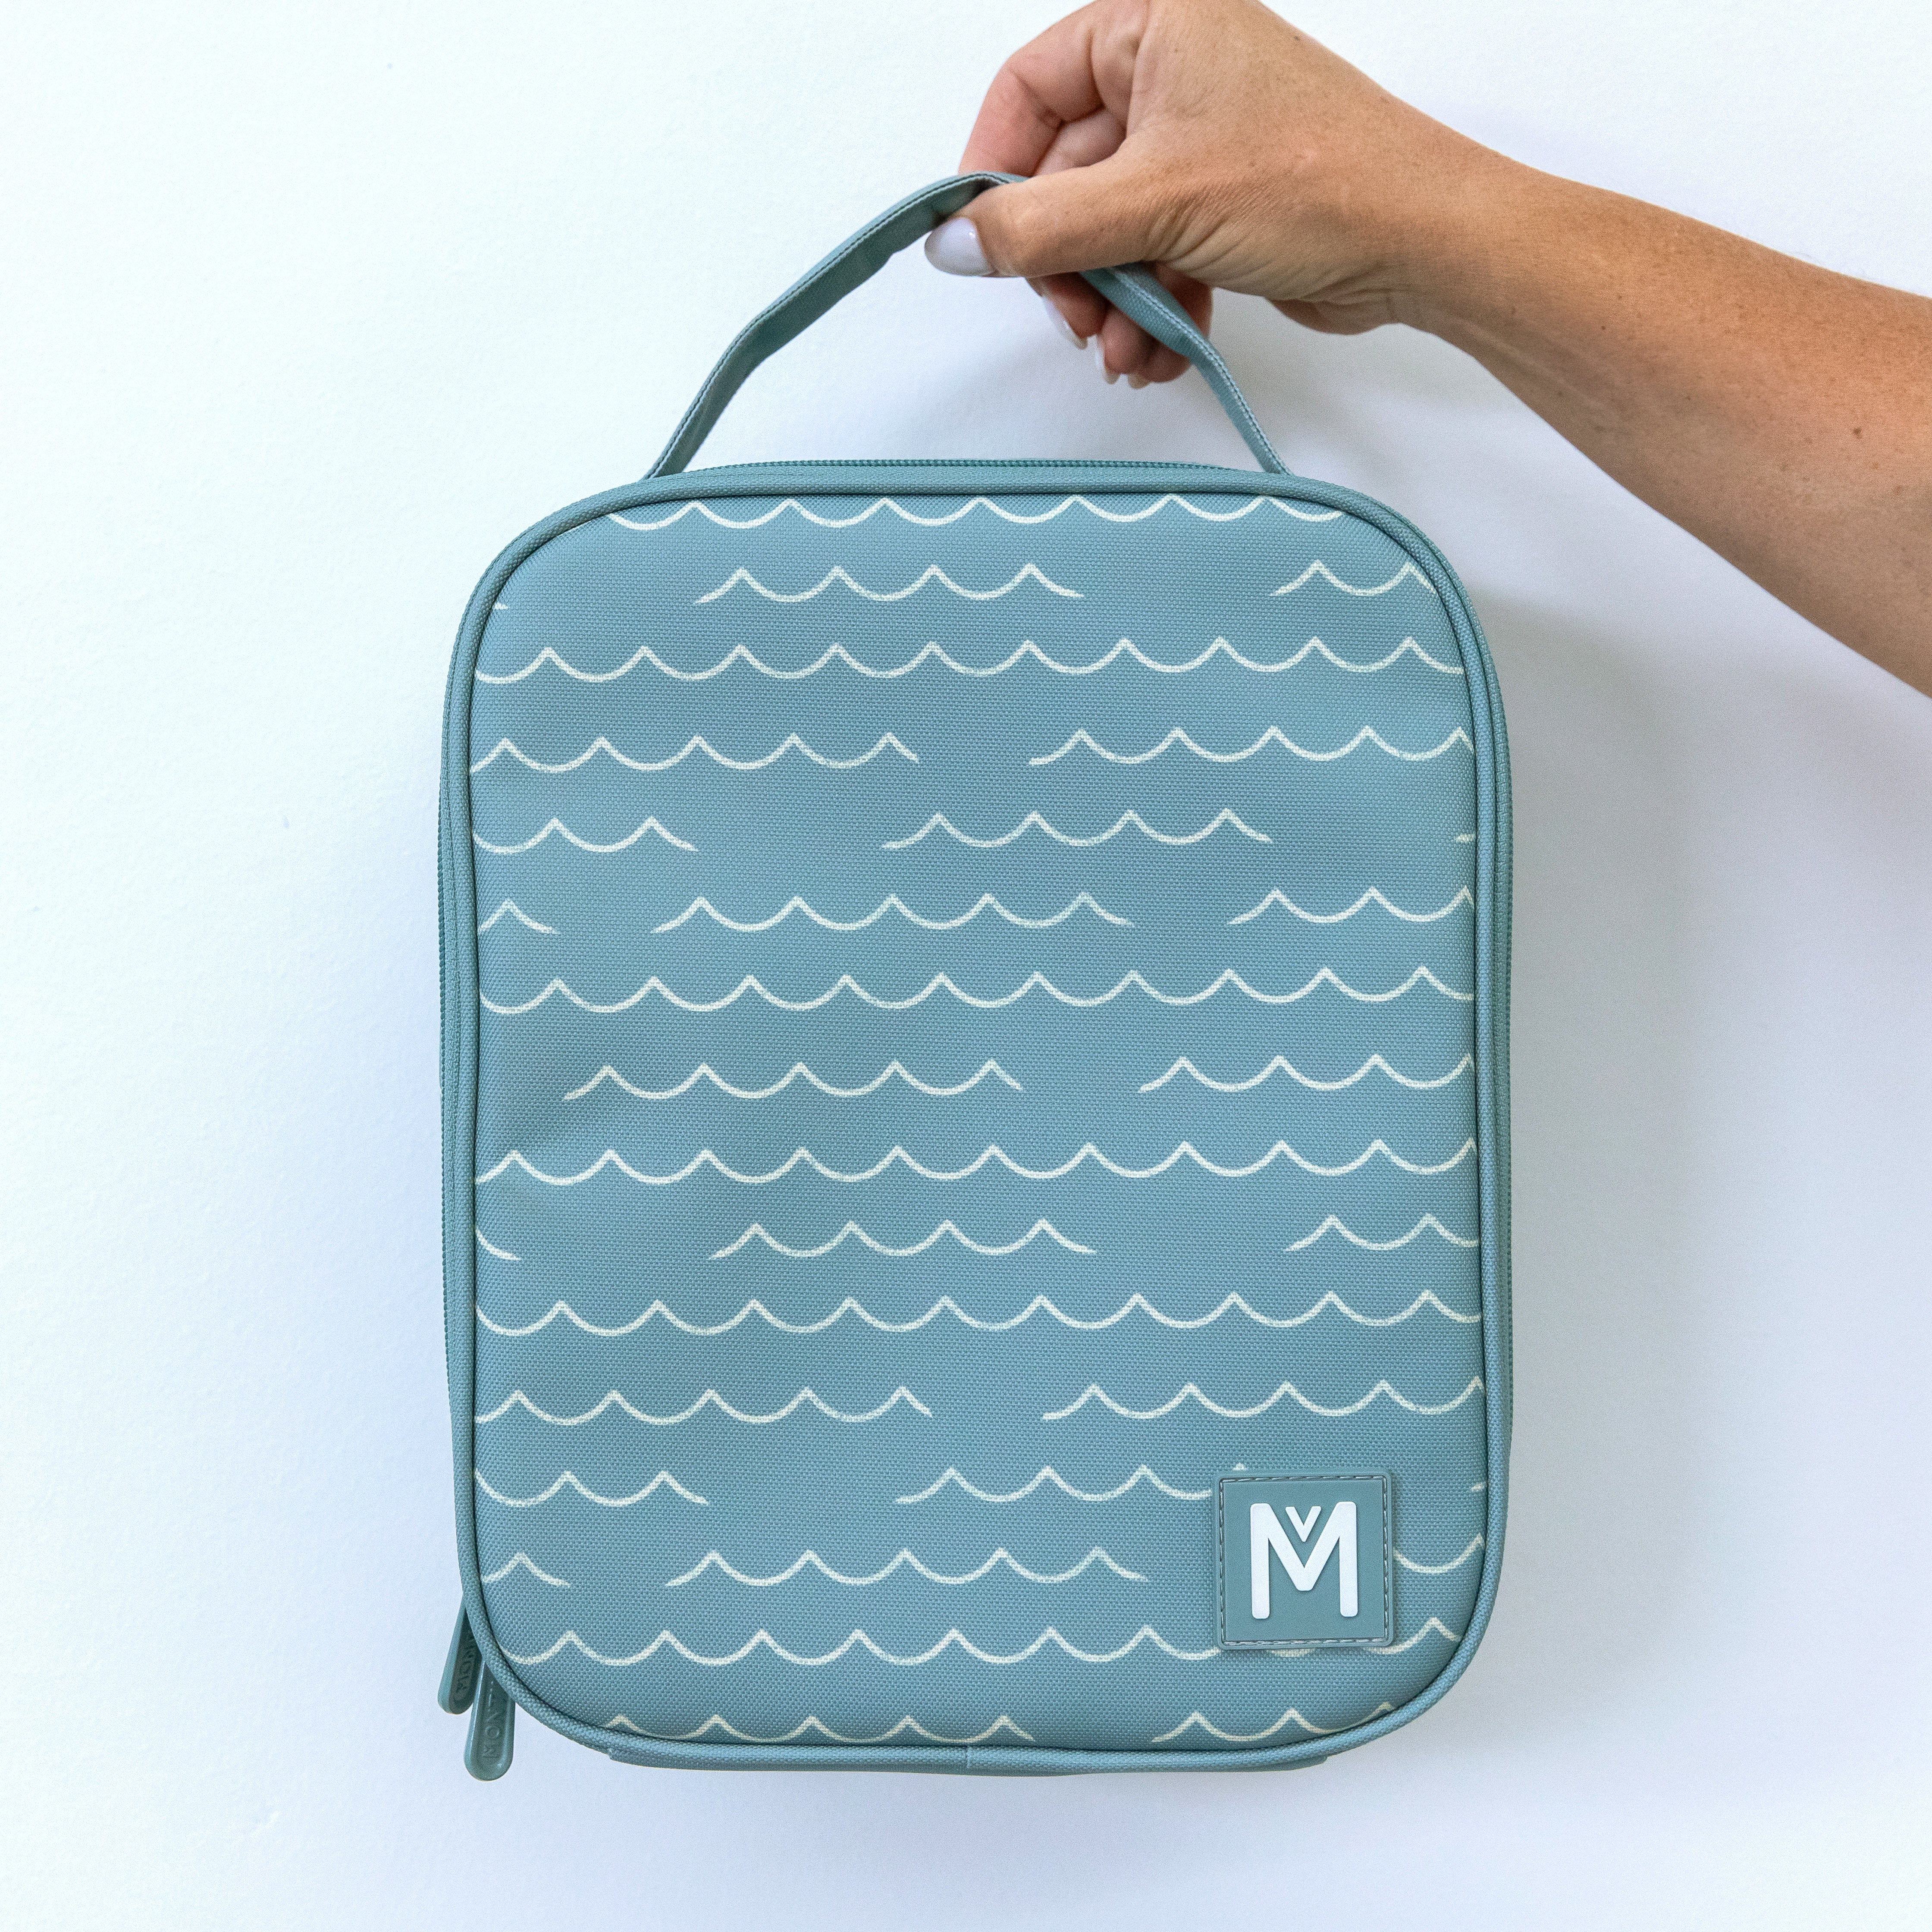 Montii Large Insulated Lunch Bag - Wave Rider